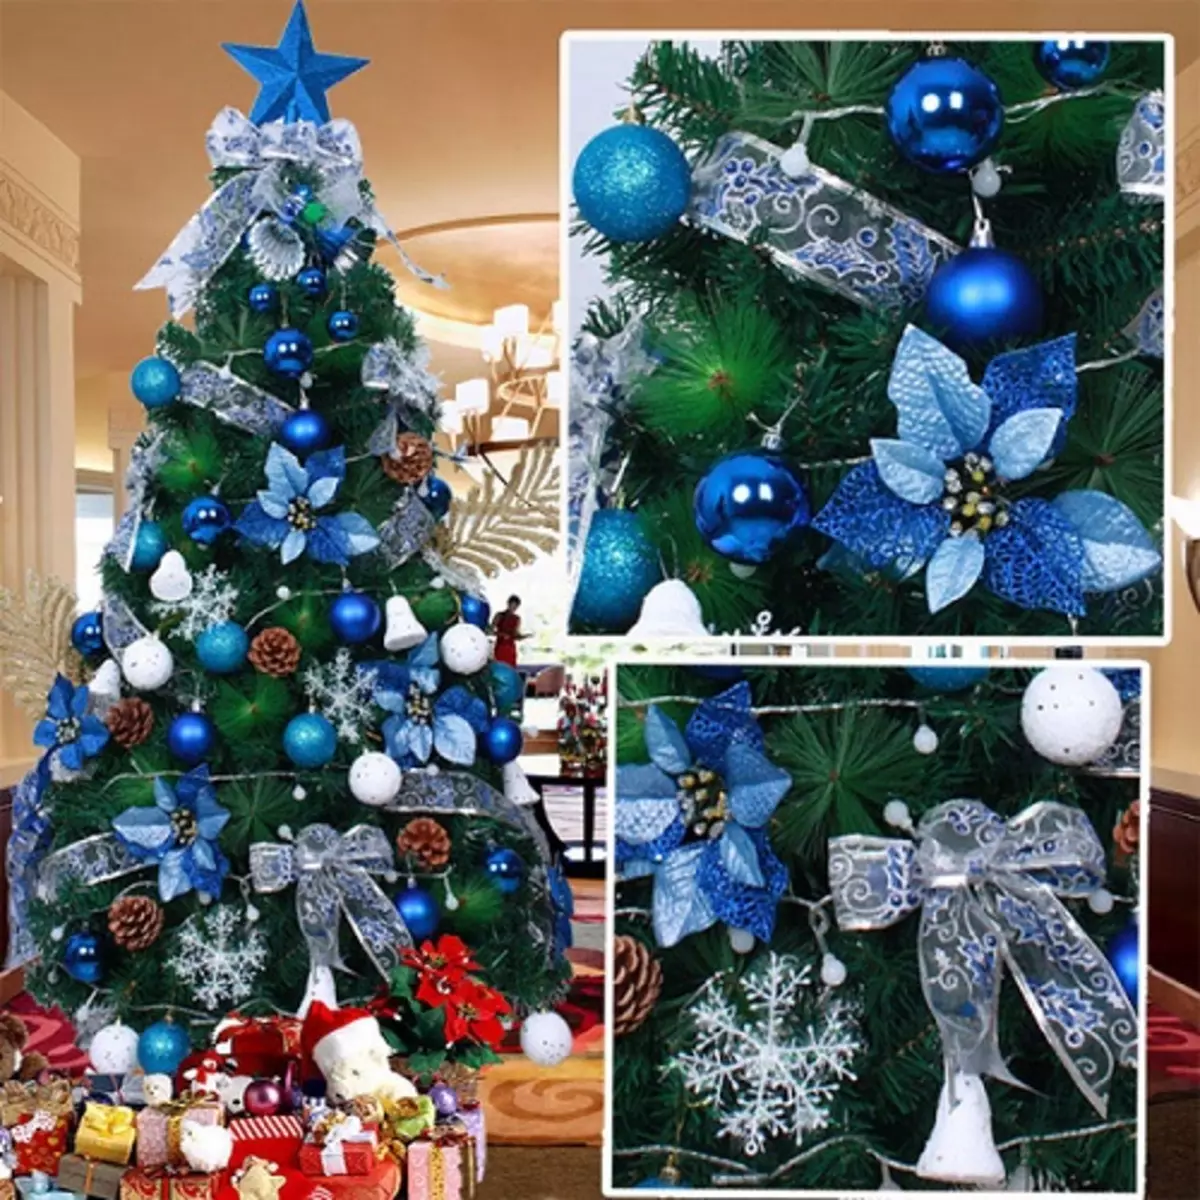 How to decorate the Christmas tree in blue-silver color? 30 photos How to dress up with balls and other decorations in blue and silver tones? 7627_29